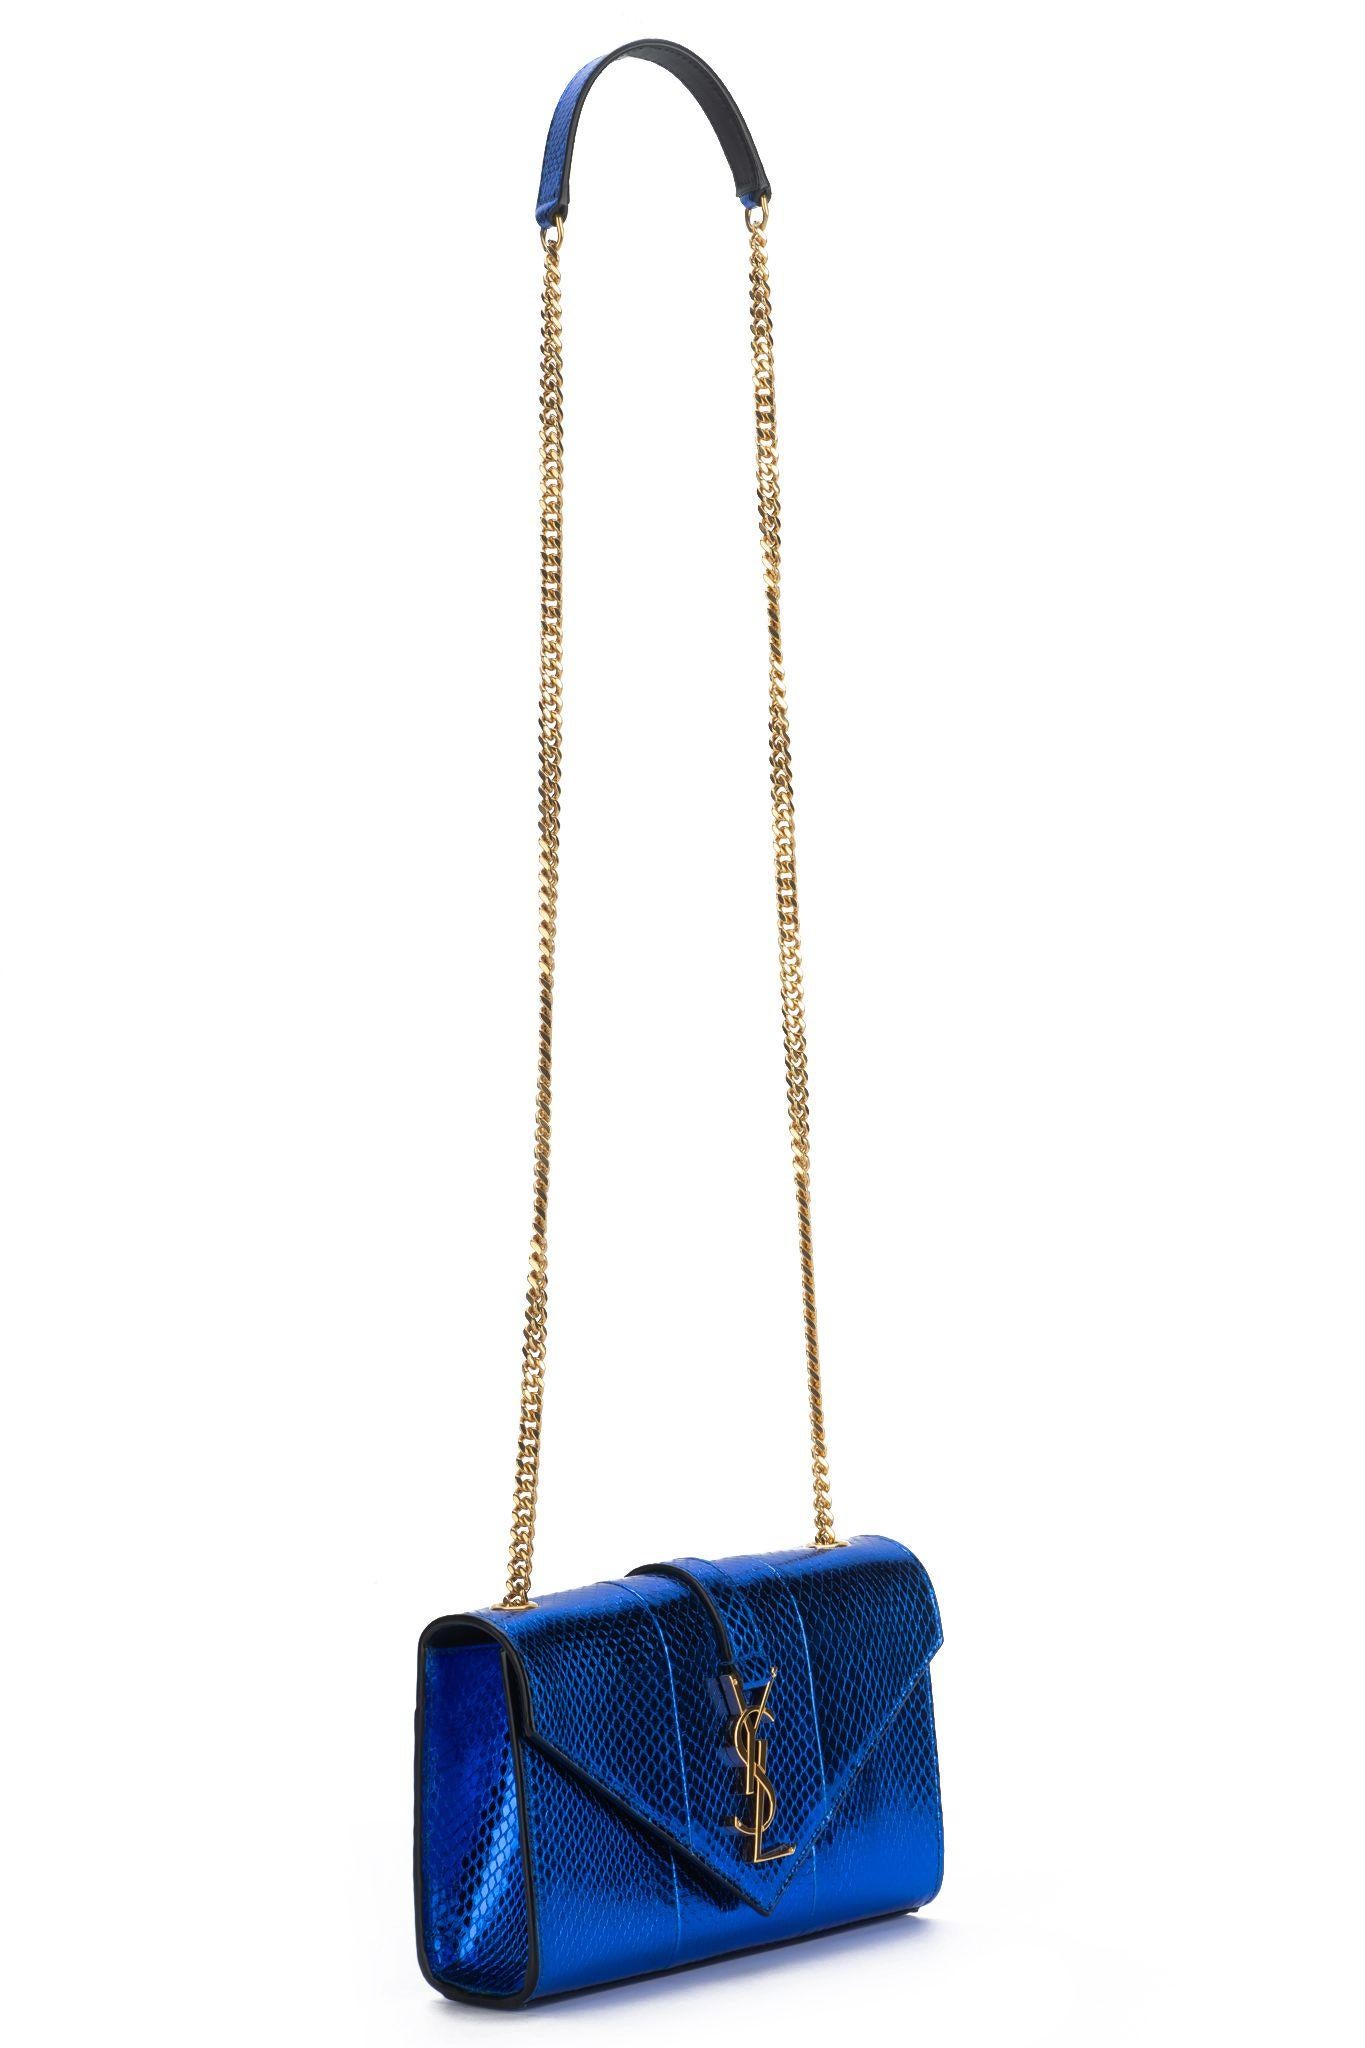 Yves Saint Laurent brand new electric blue python should bag with gold hardware. Can be worn cross body. Shoulder drop 22”. Comes with booklet, cites and original dust cover. 
Due to wild life regulations we do not sell to California residents.